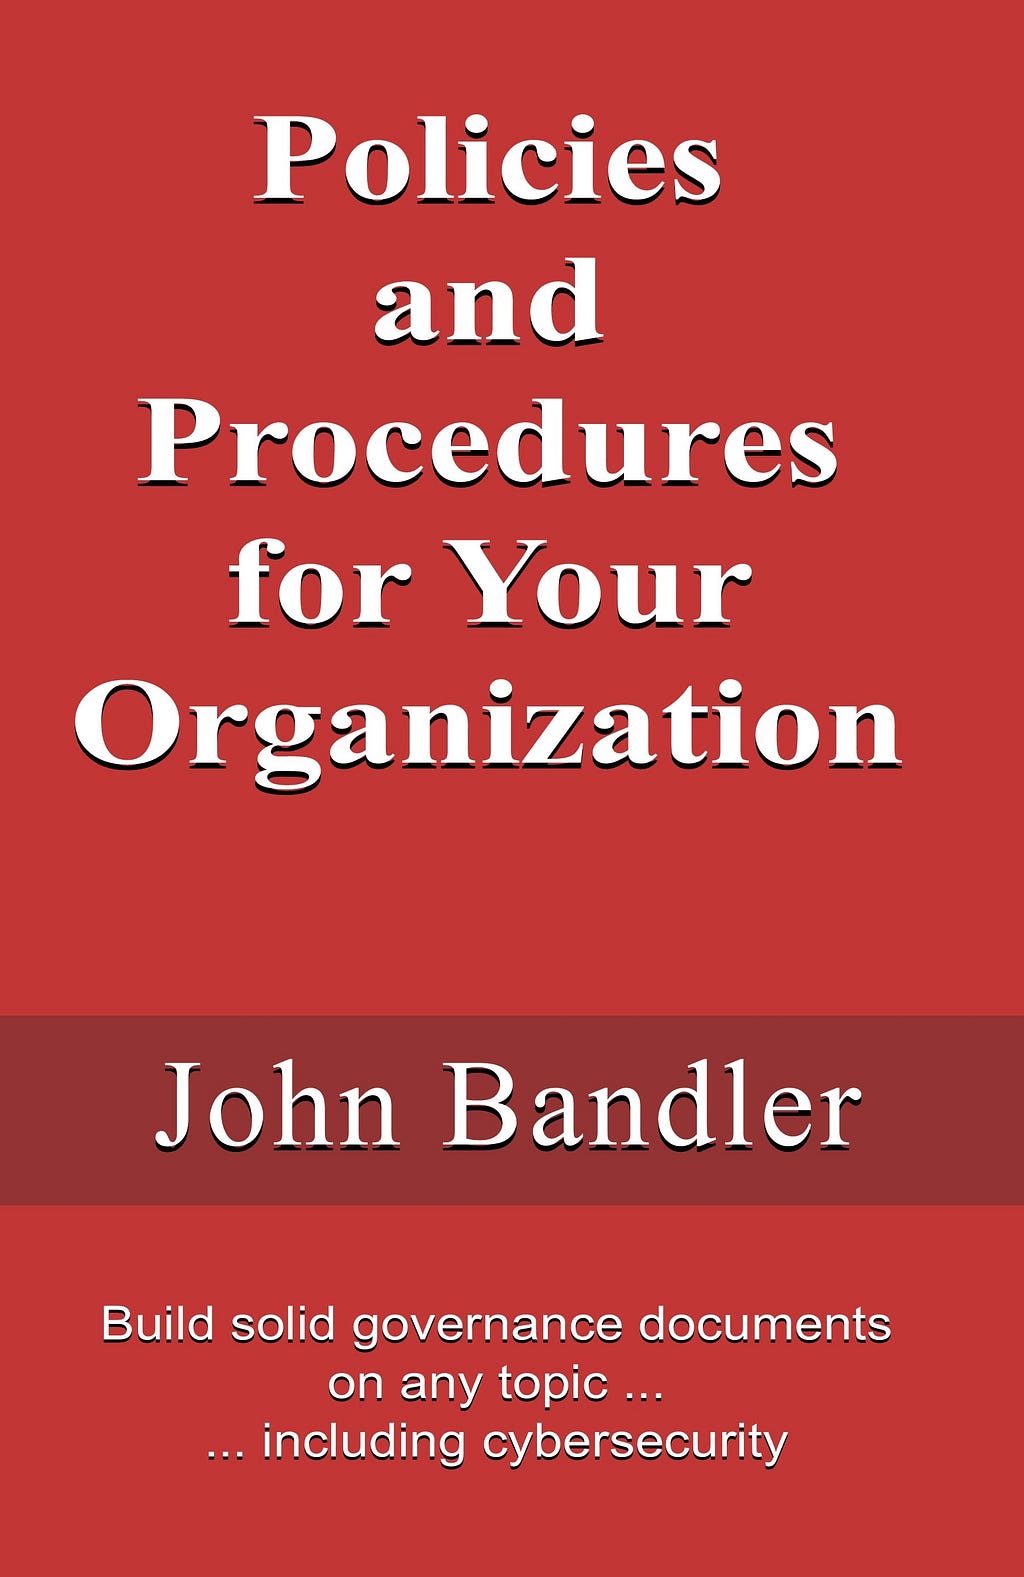 Book cover: Policies and Procedures for Your Organization: Build solid governance documents on any topic … including cybersecurity by John Bandler